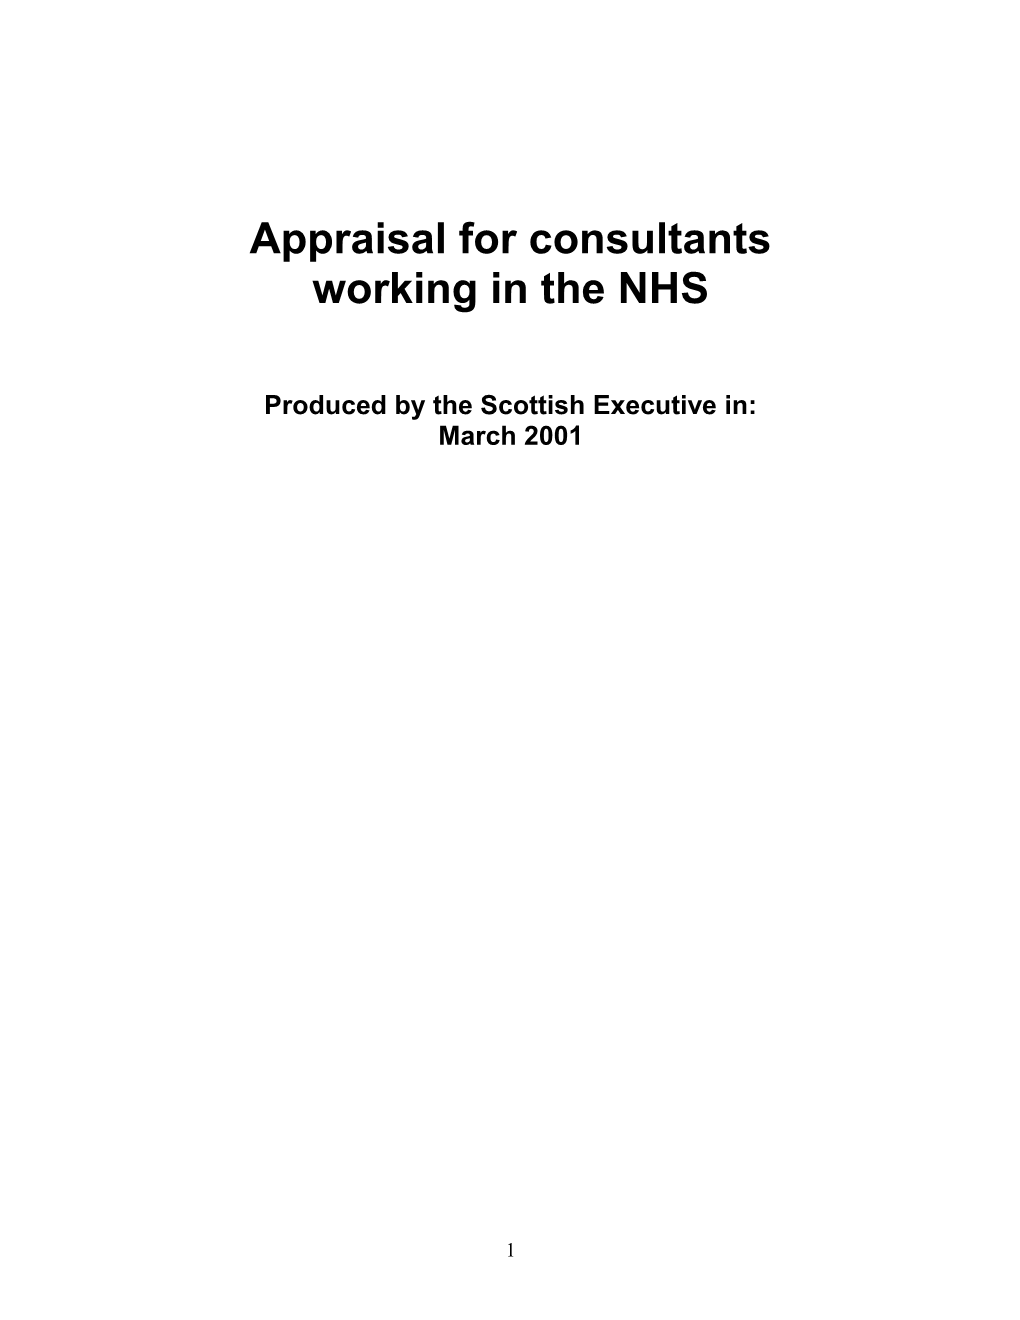 NHS Appraisal for Consultants